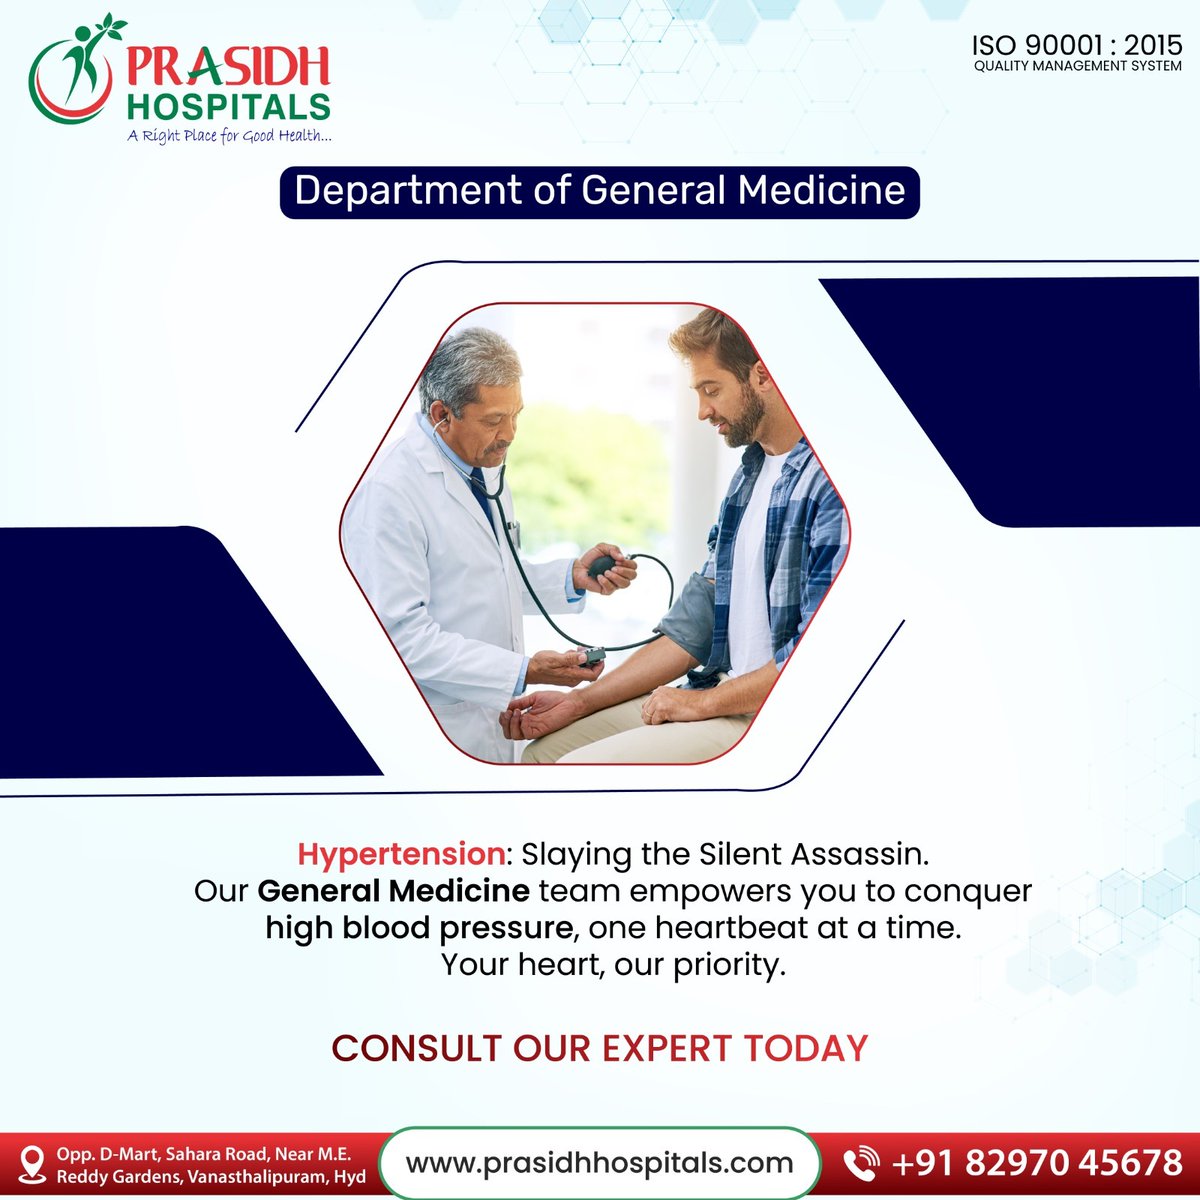 Prasidh Hospital excels in managing hypertension, offering top-notch care for patients dealing with high blood pressure. Our experienced team of doctors and specialists employs the latest techniques and medications to provide effective treatment. 

#generalmedicine #hypertension